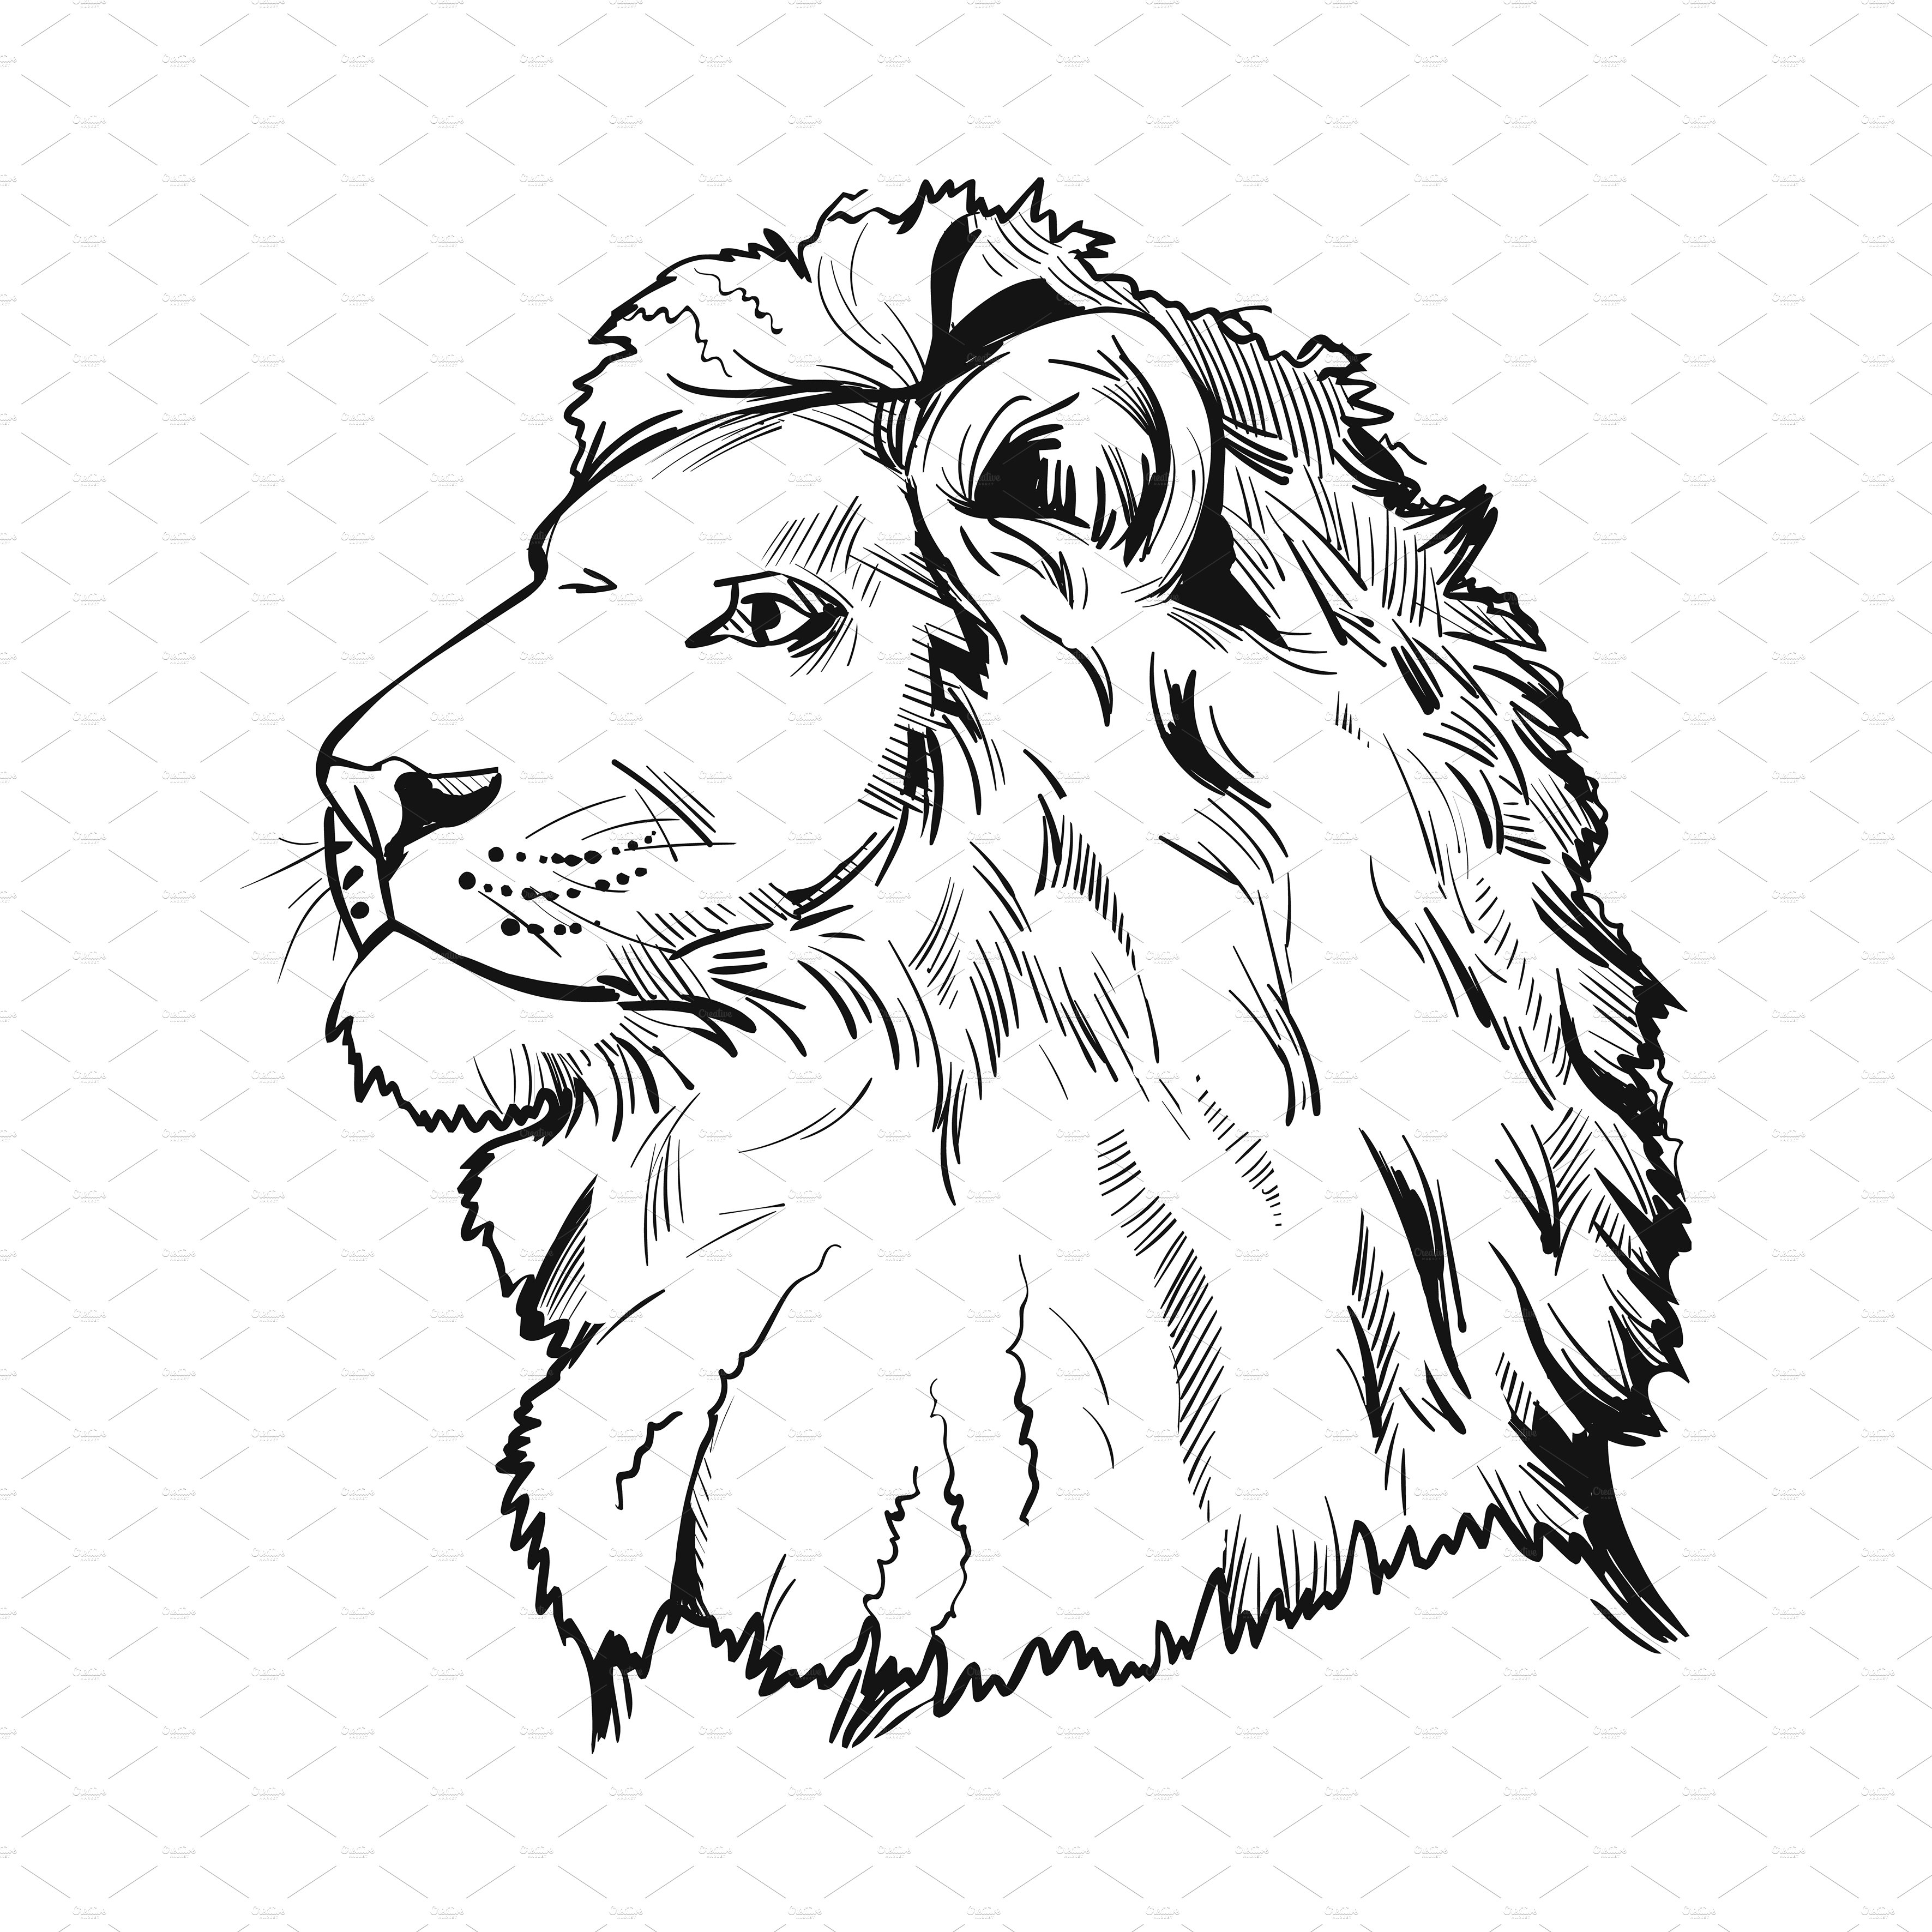 Lion in a sketch style.